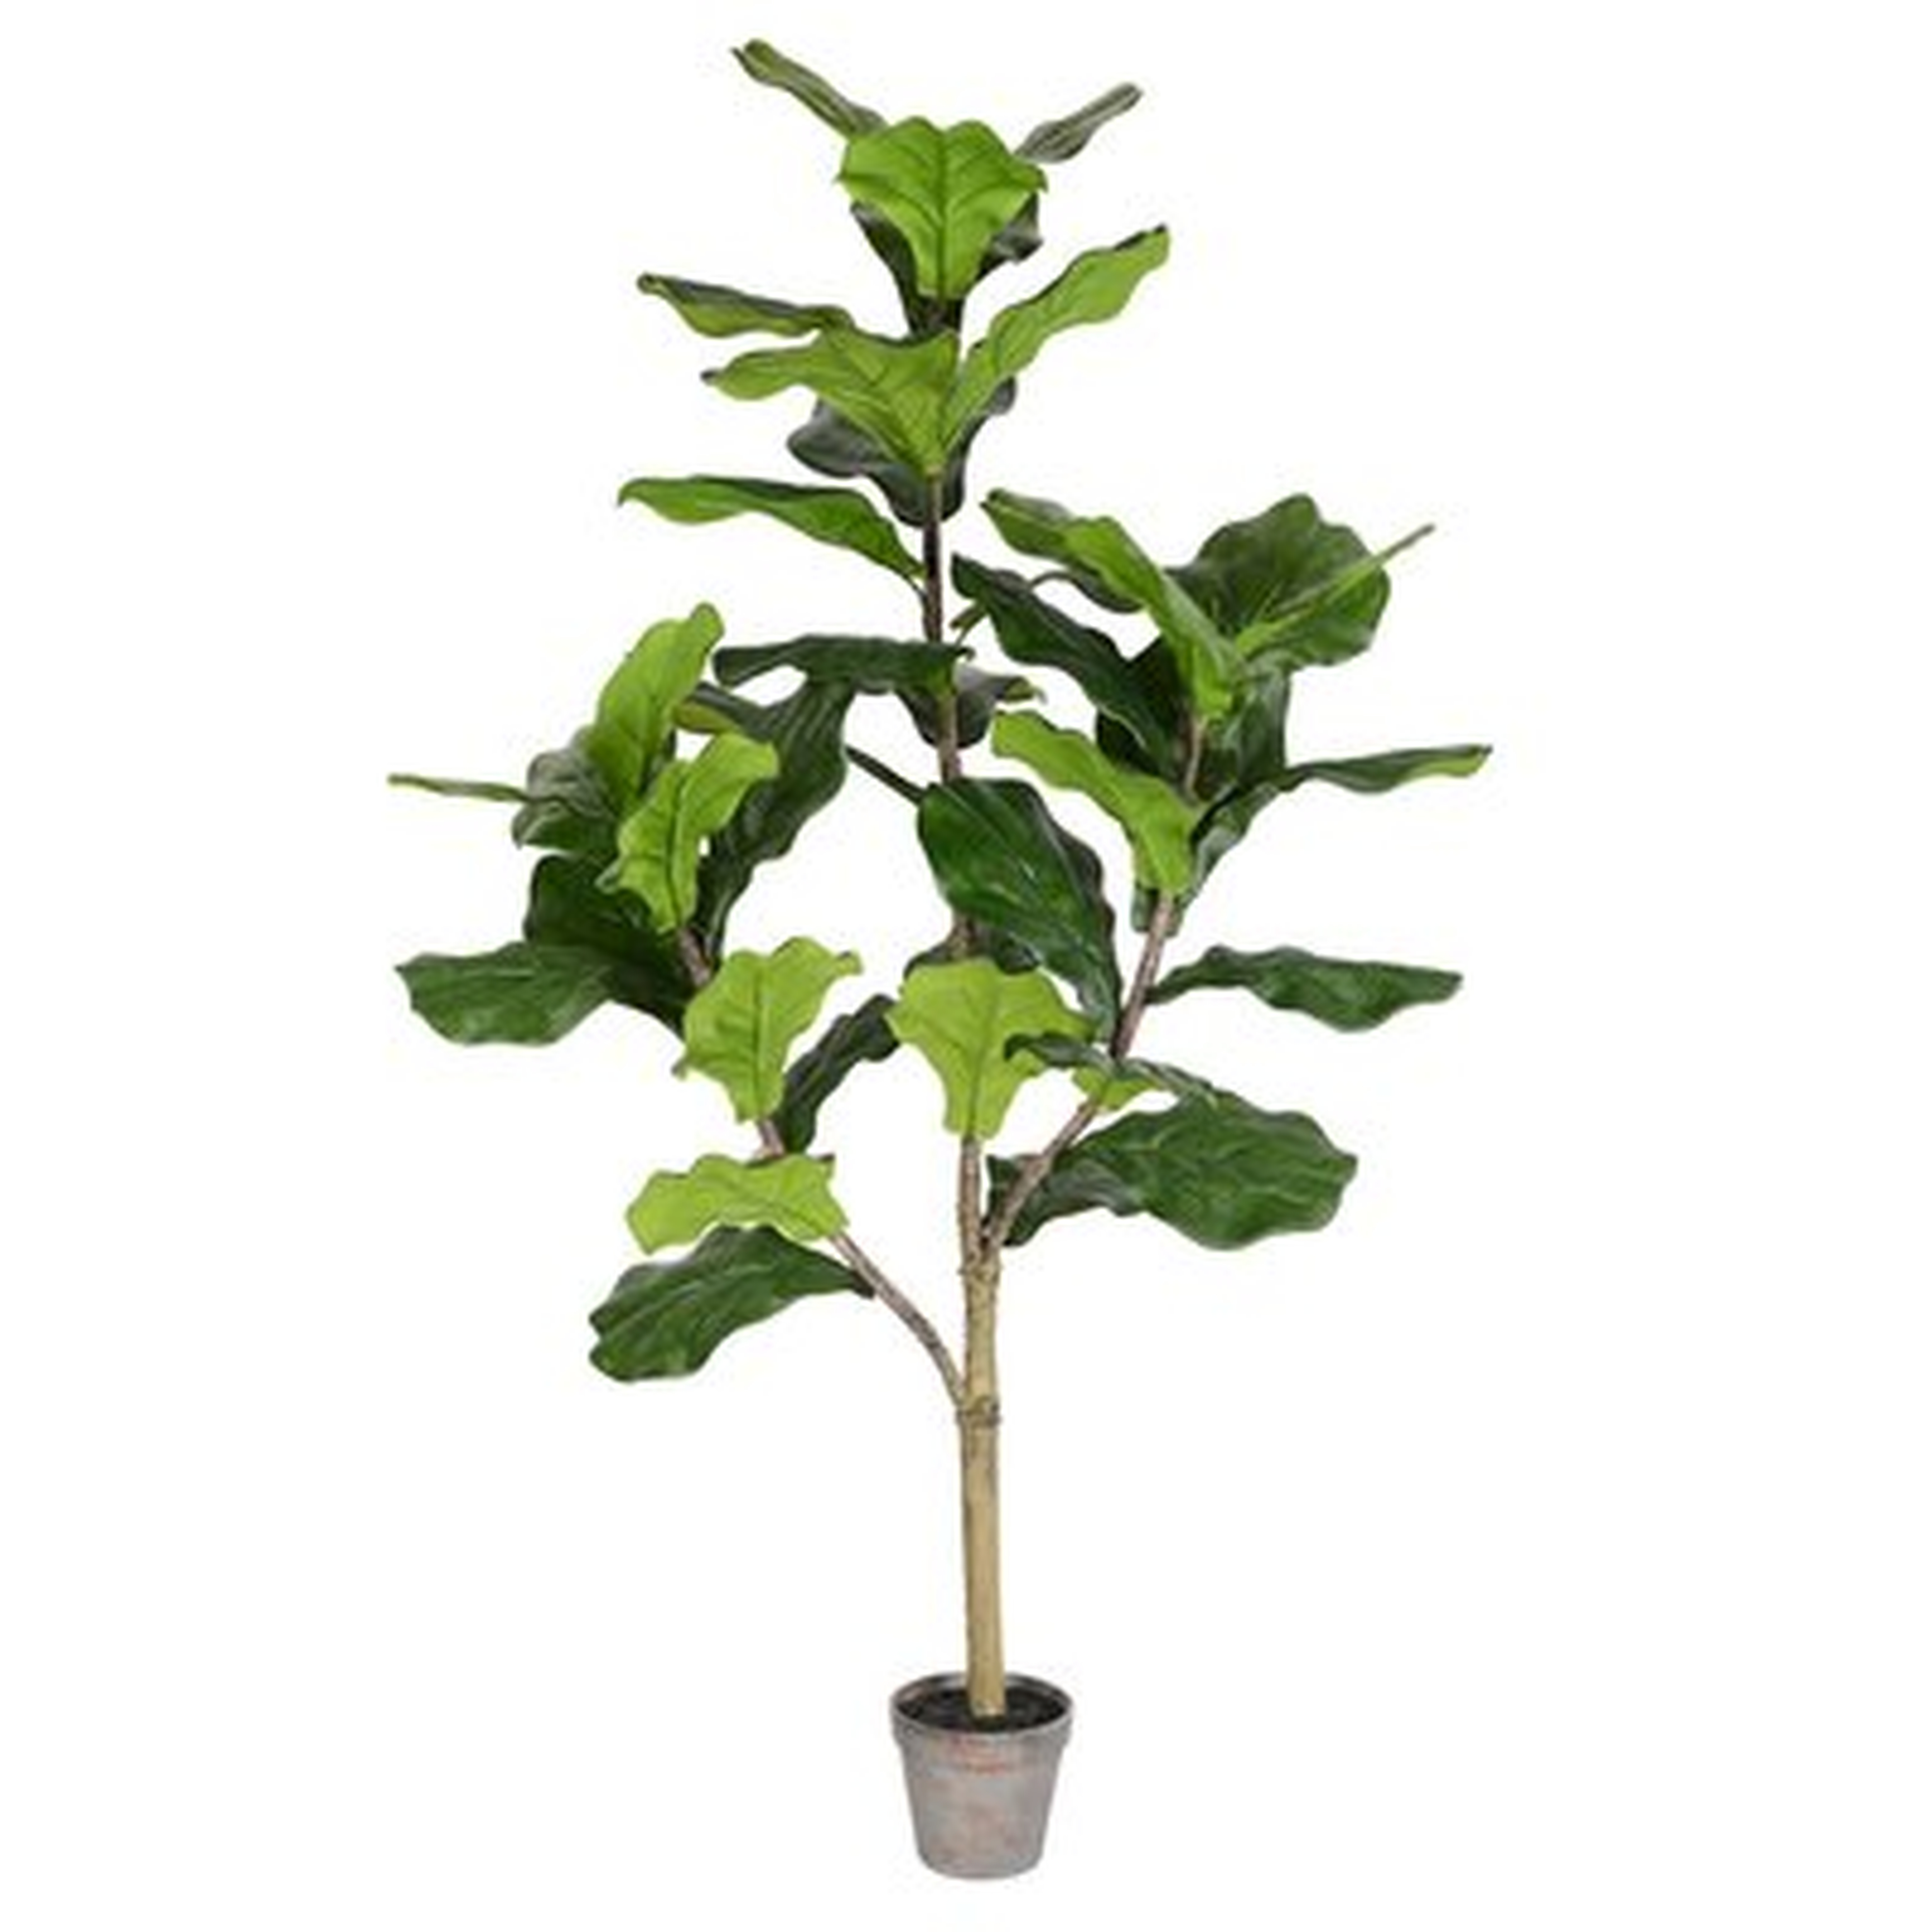 Artificial Potted Floor Foliage Fiddle Tree in Pot - Wayfair